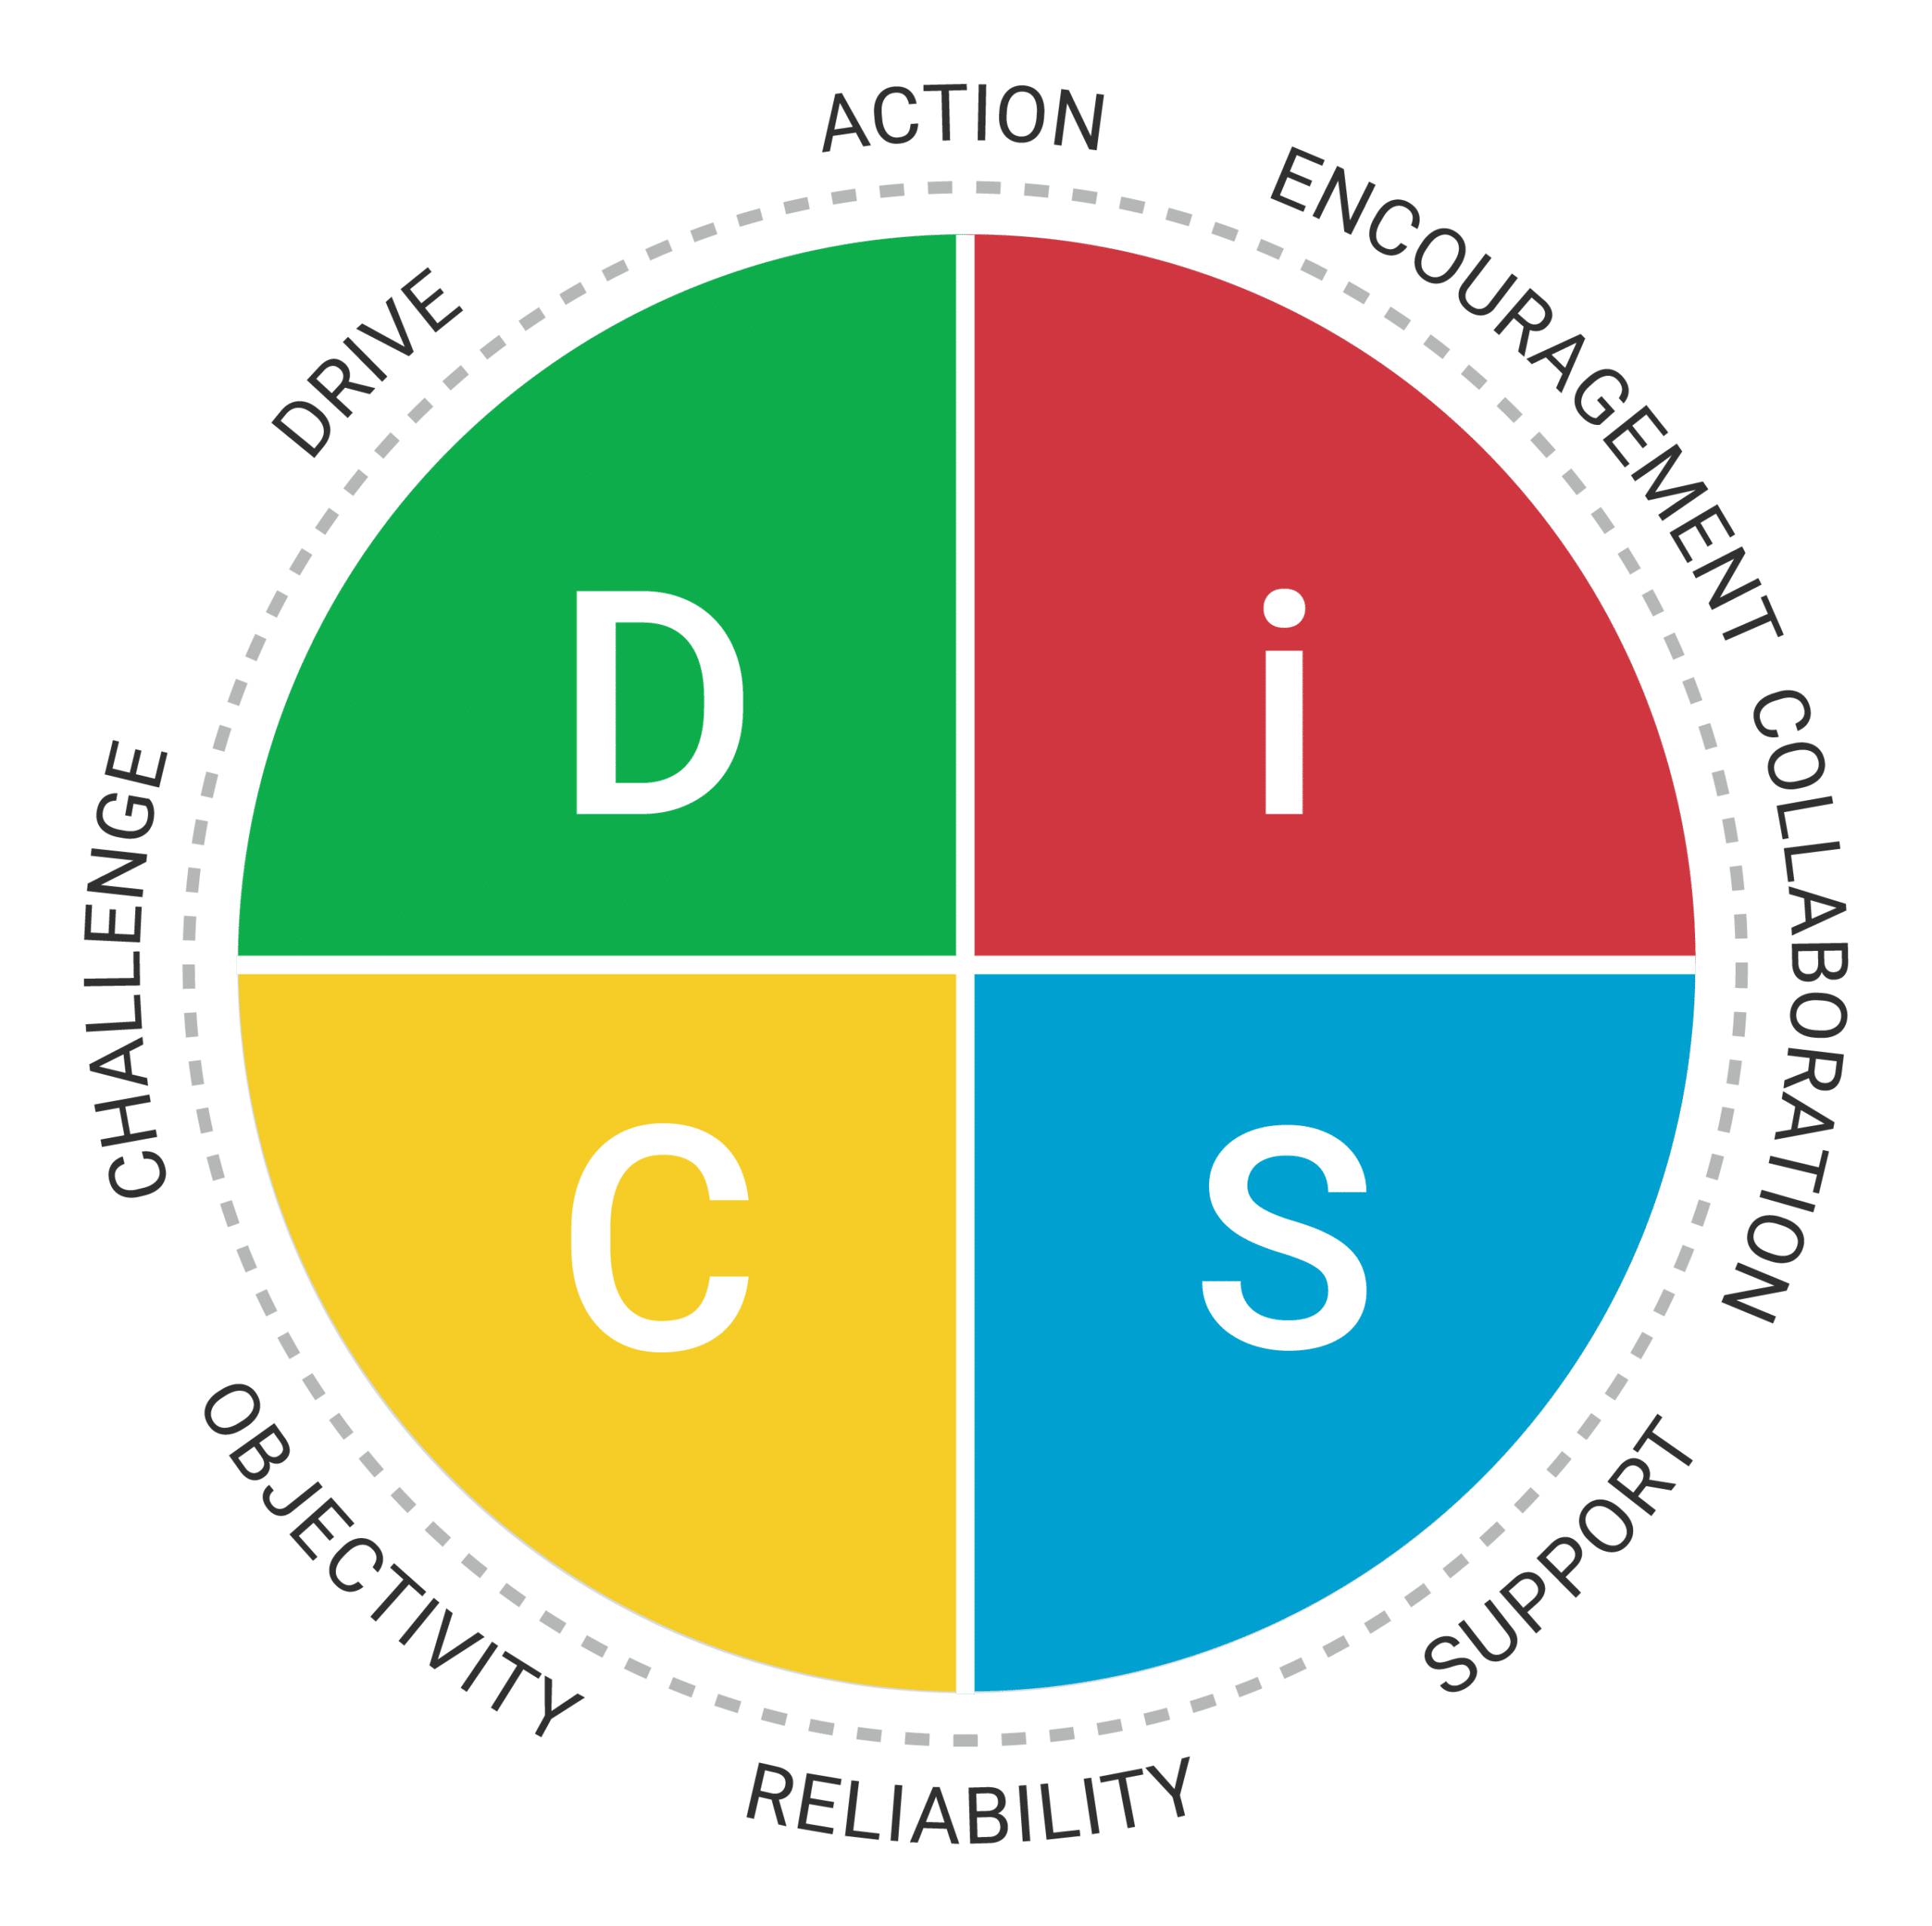 Priorities map from Everything DiSC Management